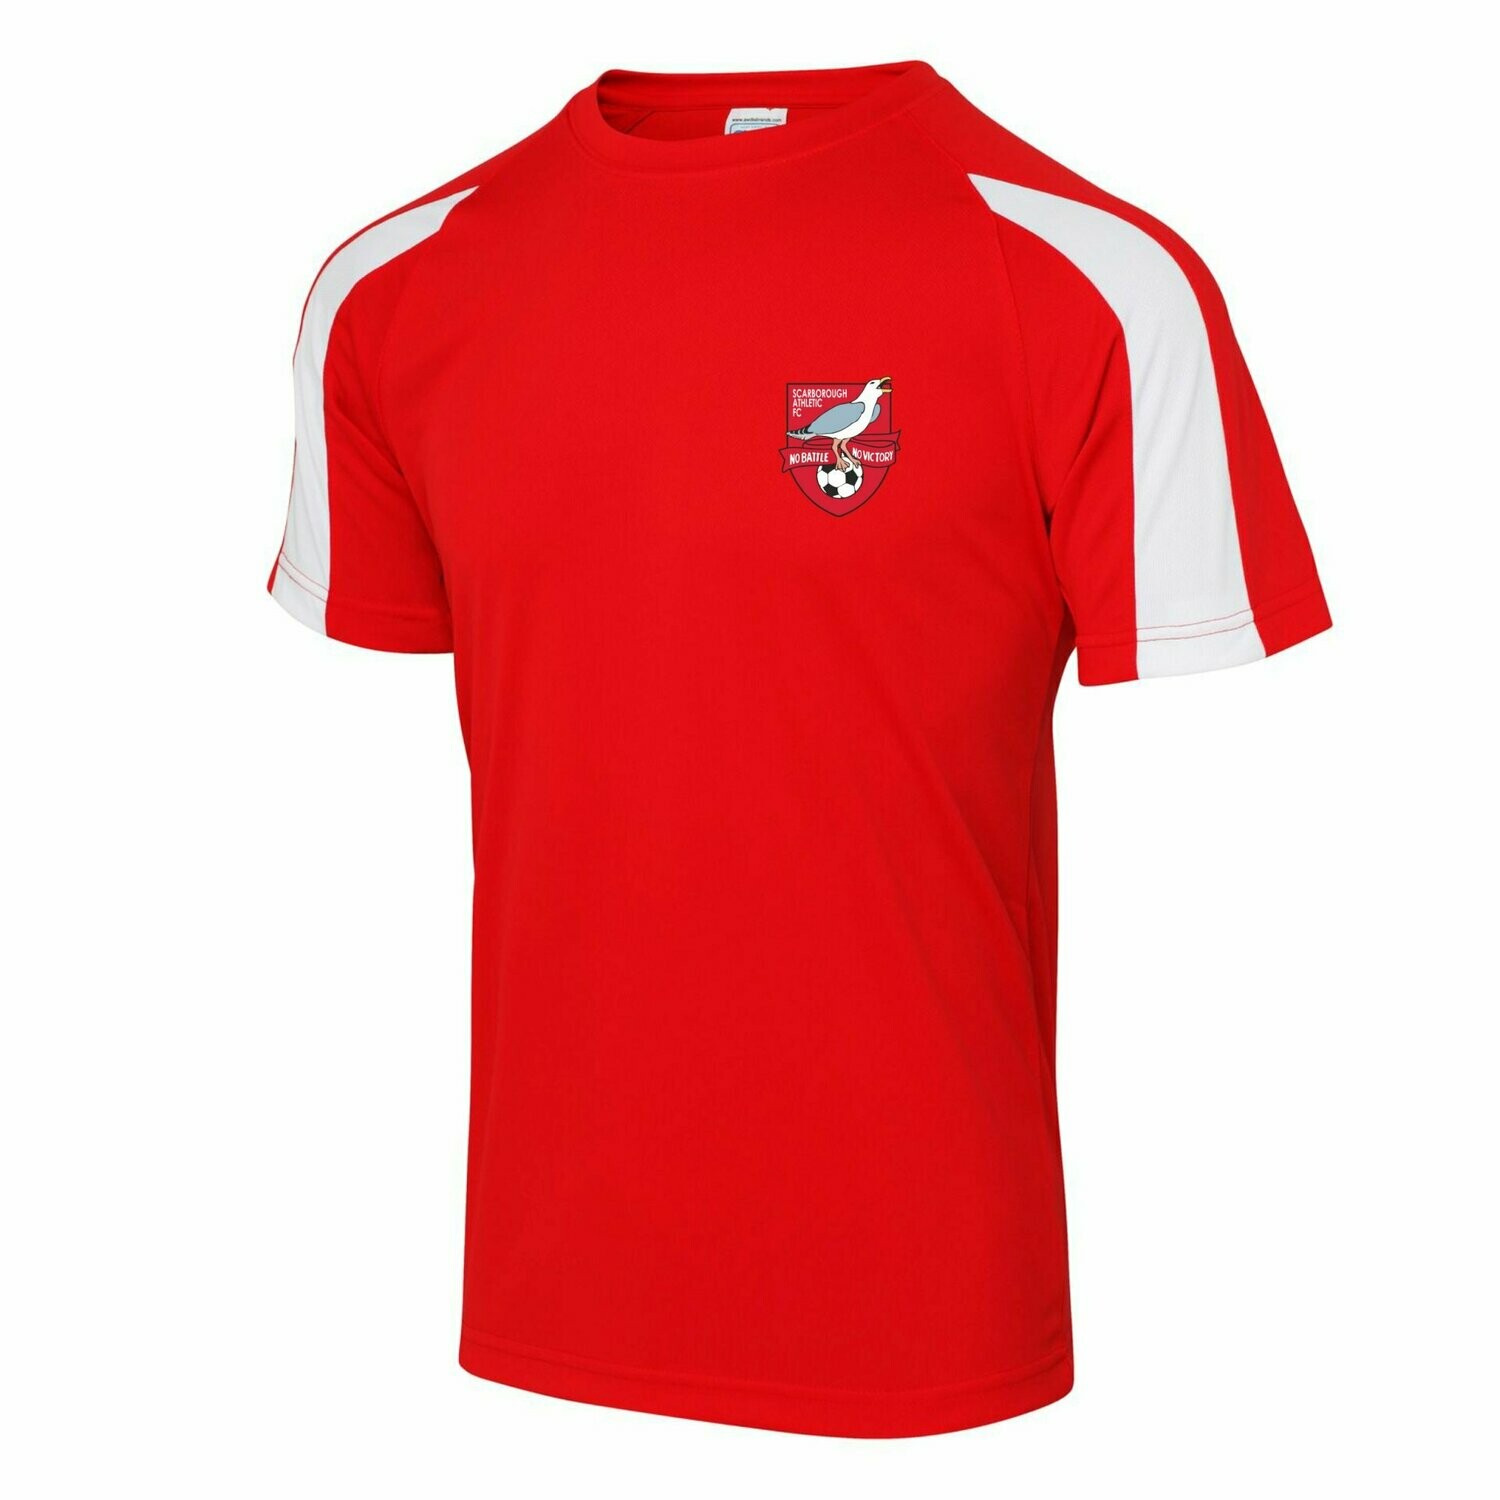 Adults' Scarborough Athletic Cool Tec T-shirt